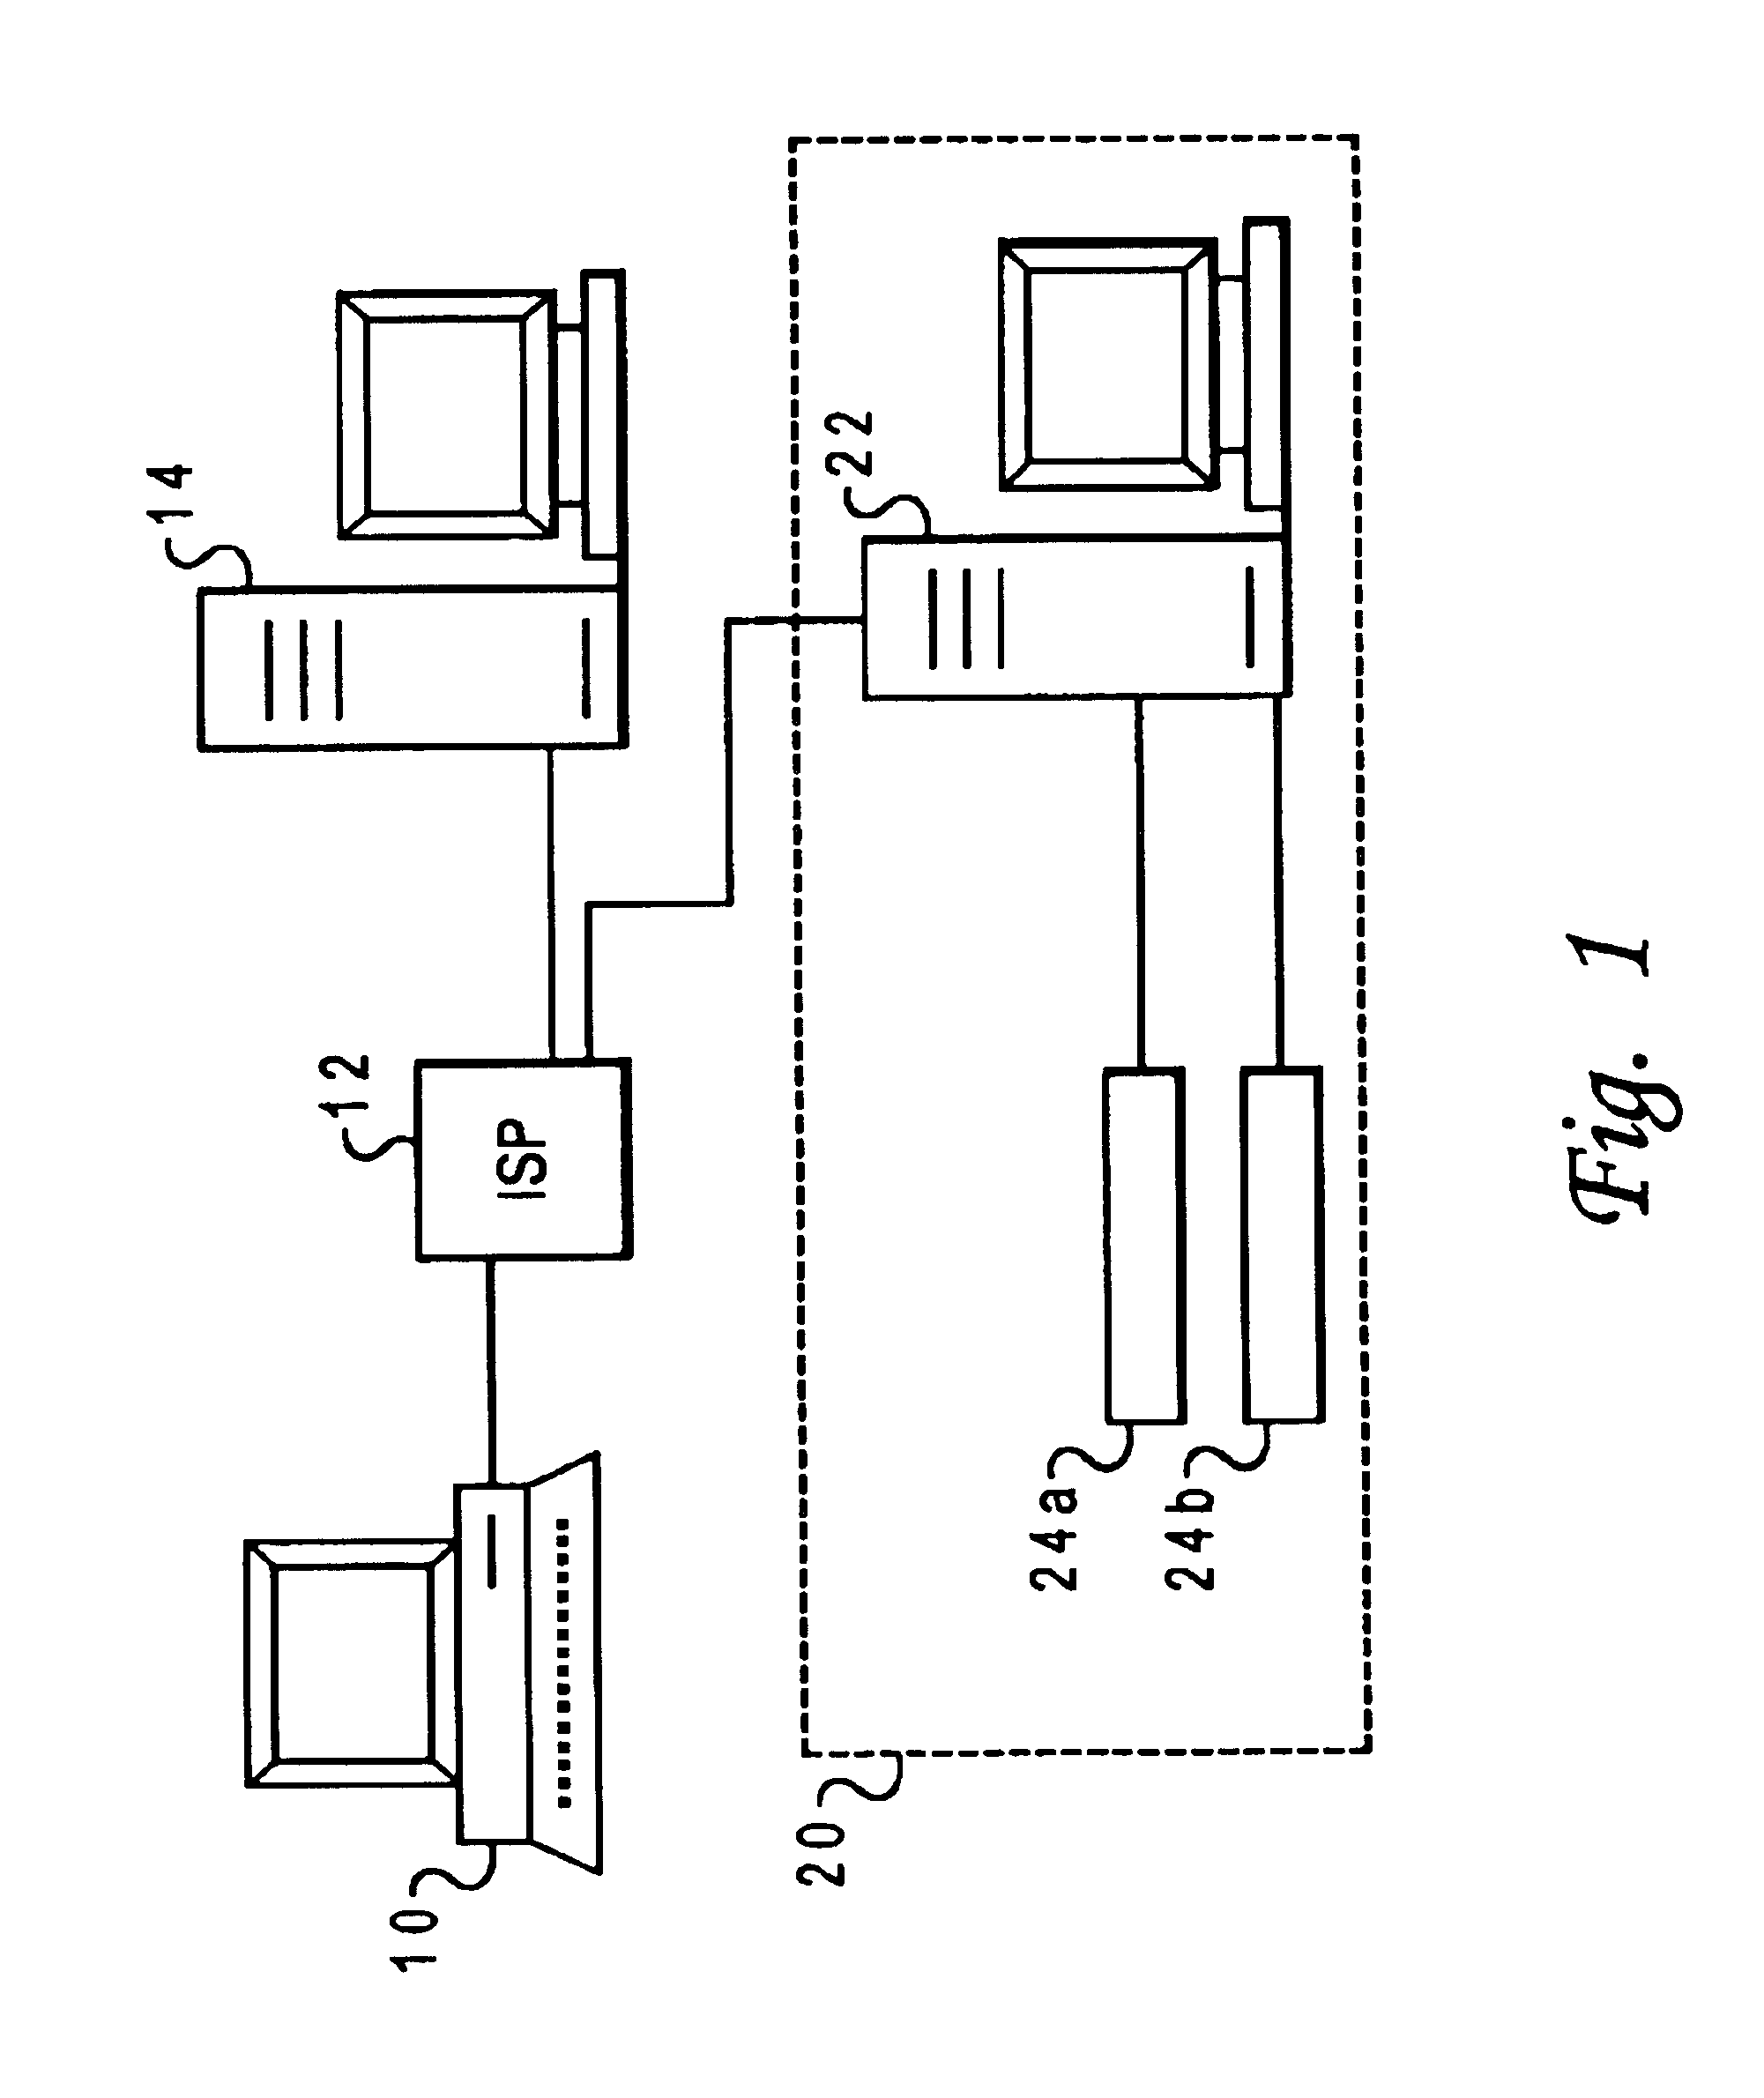 System and method for performing automatic rejuvenation at the optimal time based on work load history in a distributed data processing environment